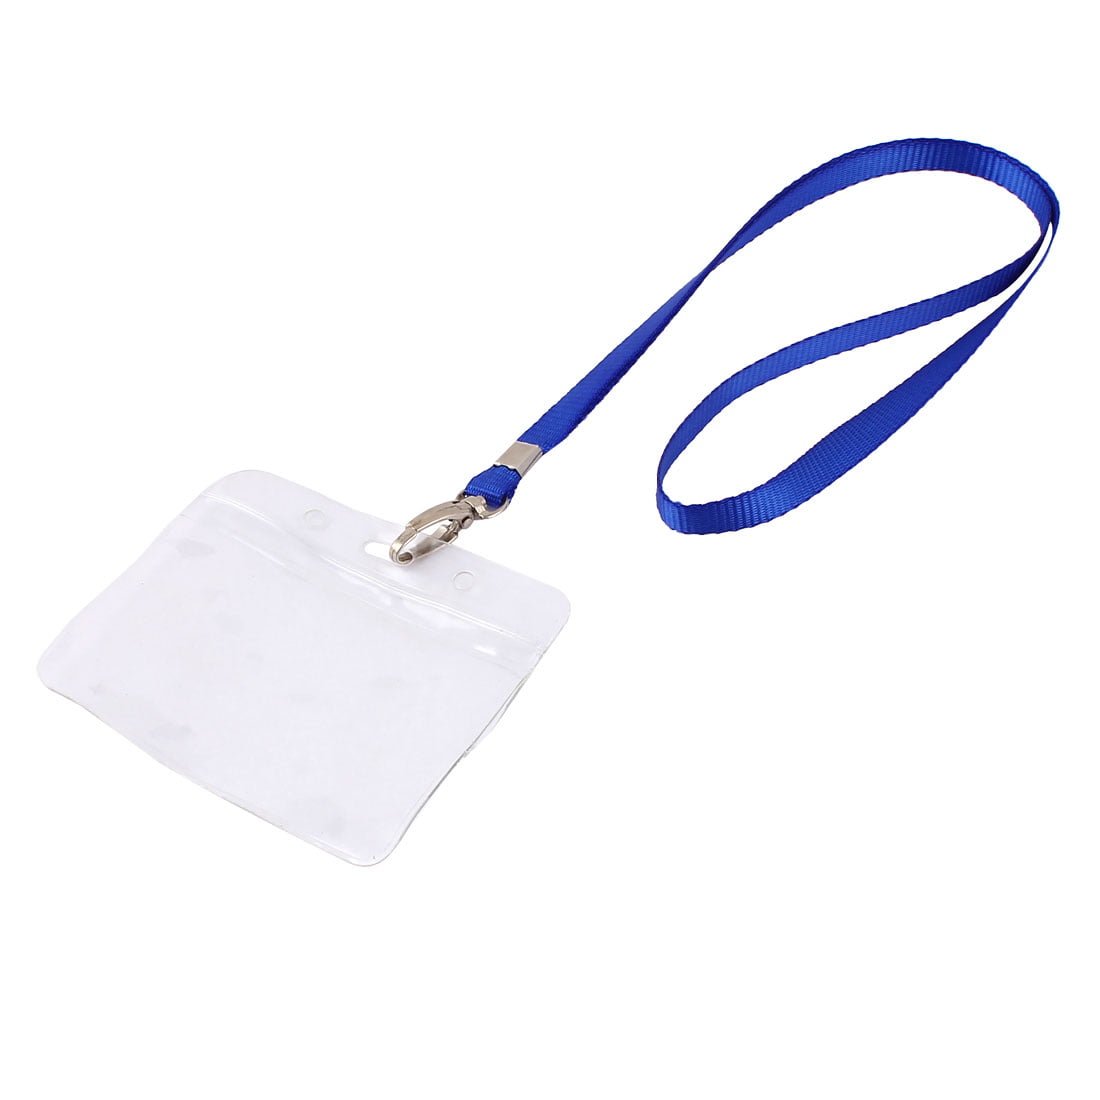 id lanyard Card badge holder  for office school with lanyard neck strap 